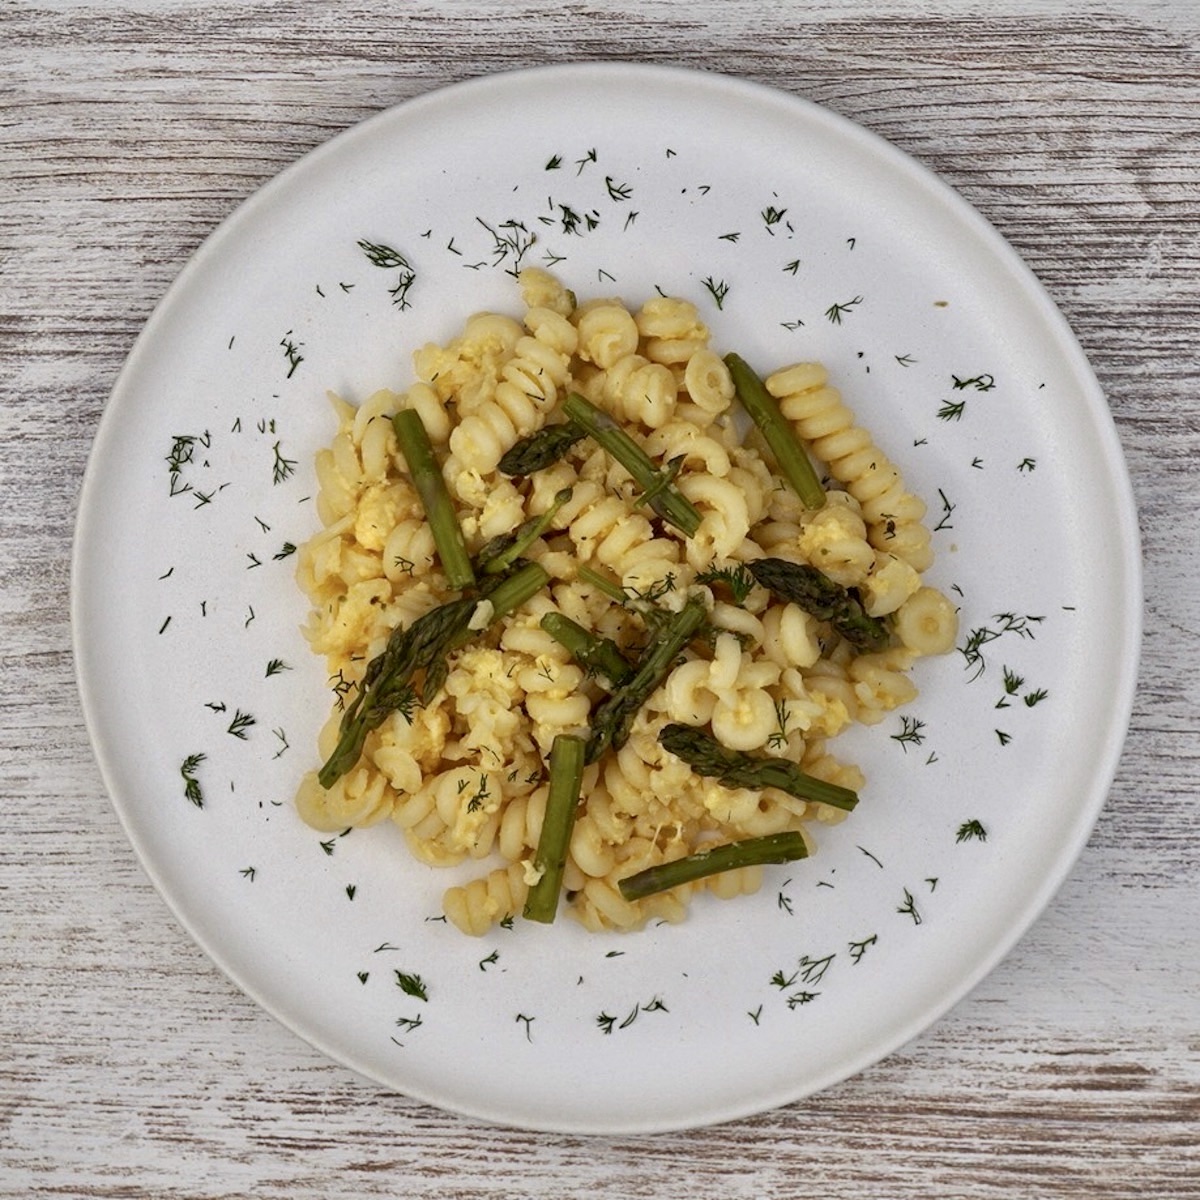 A plate of pasta with scrambled eggs and asparagus.